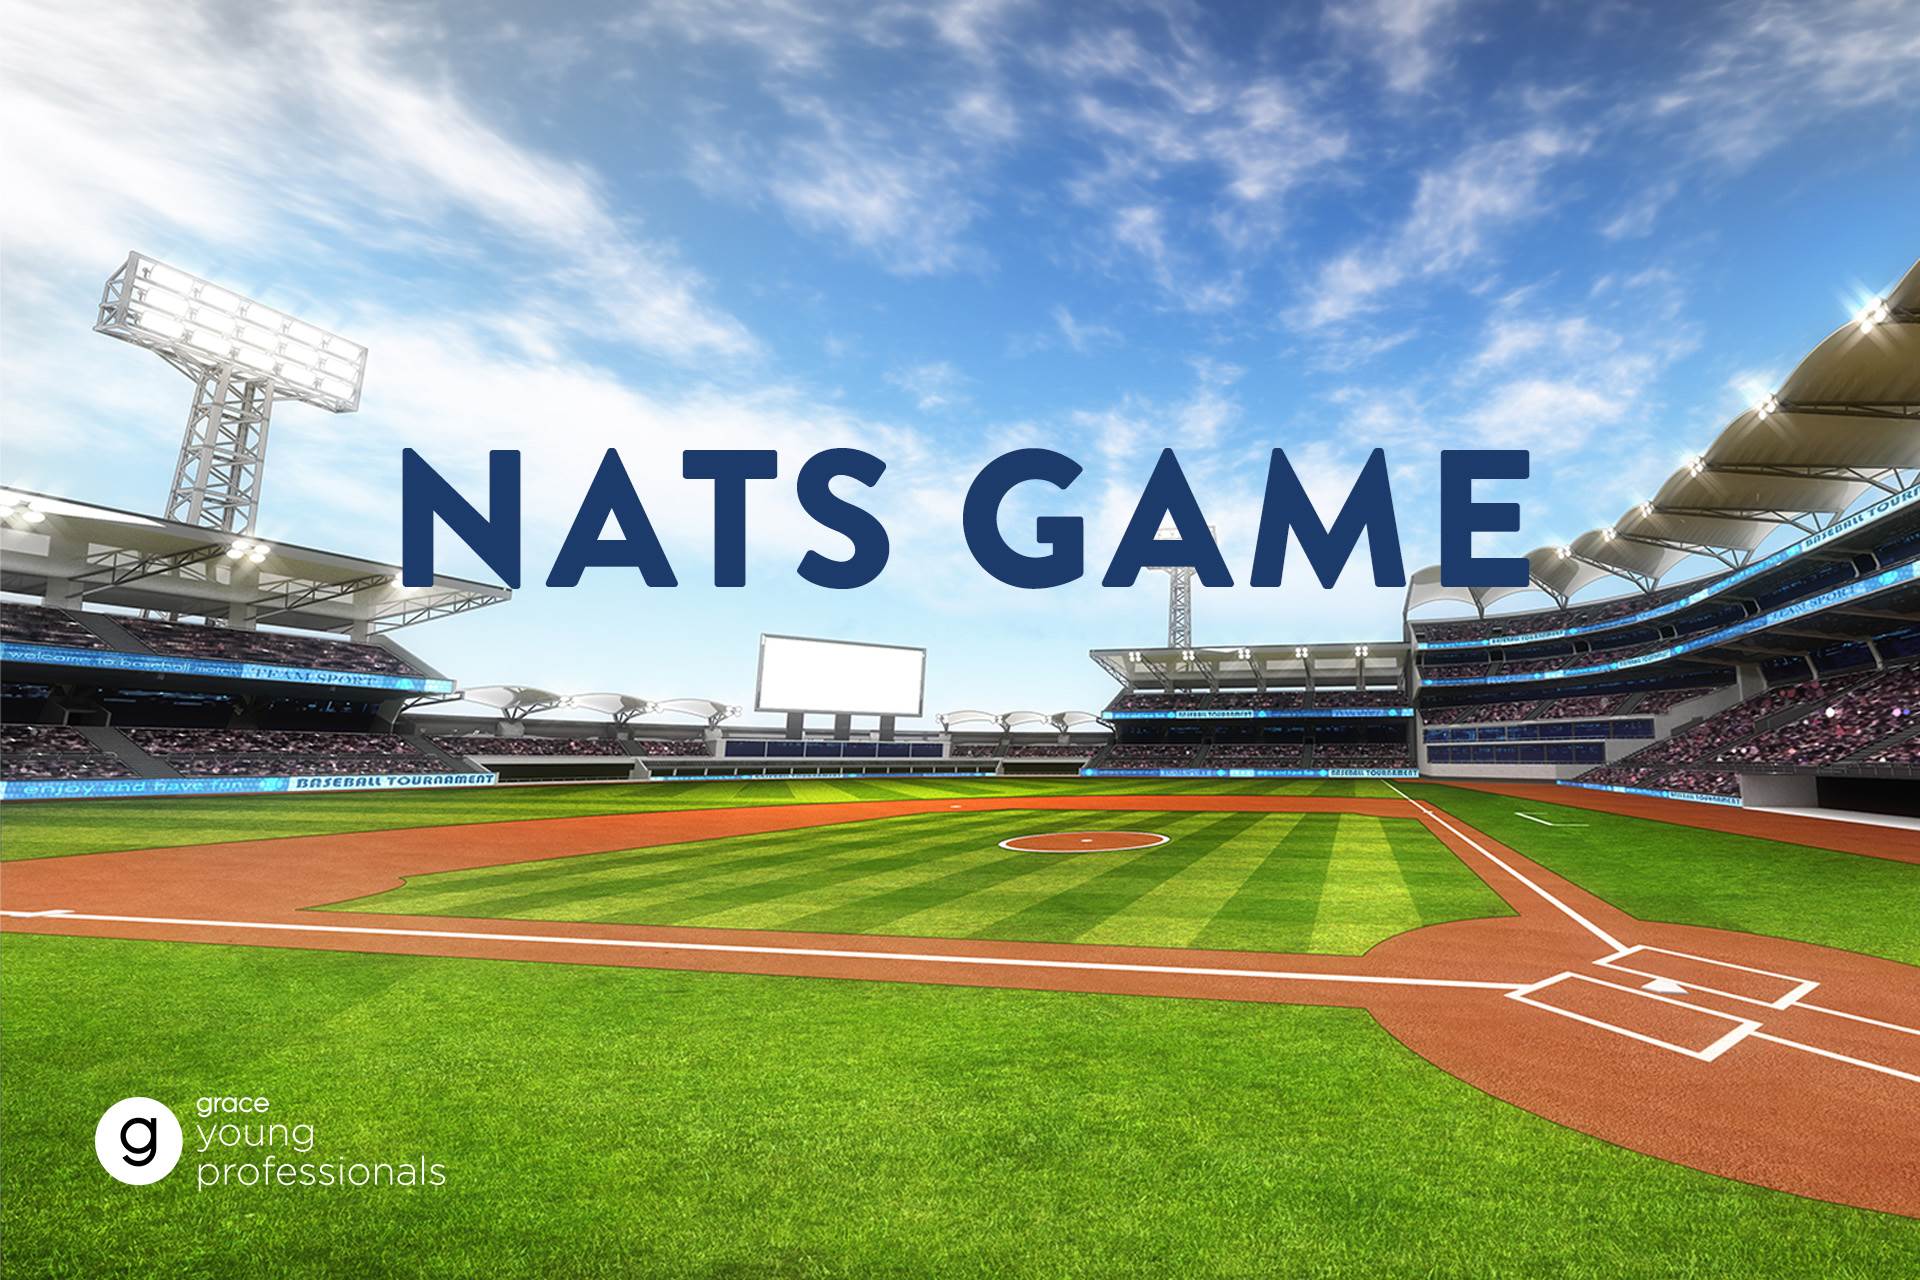 Link to Nats Game detail page